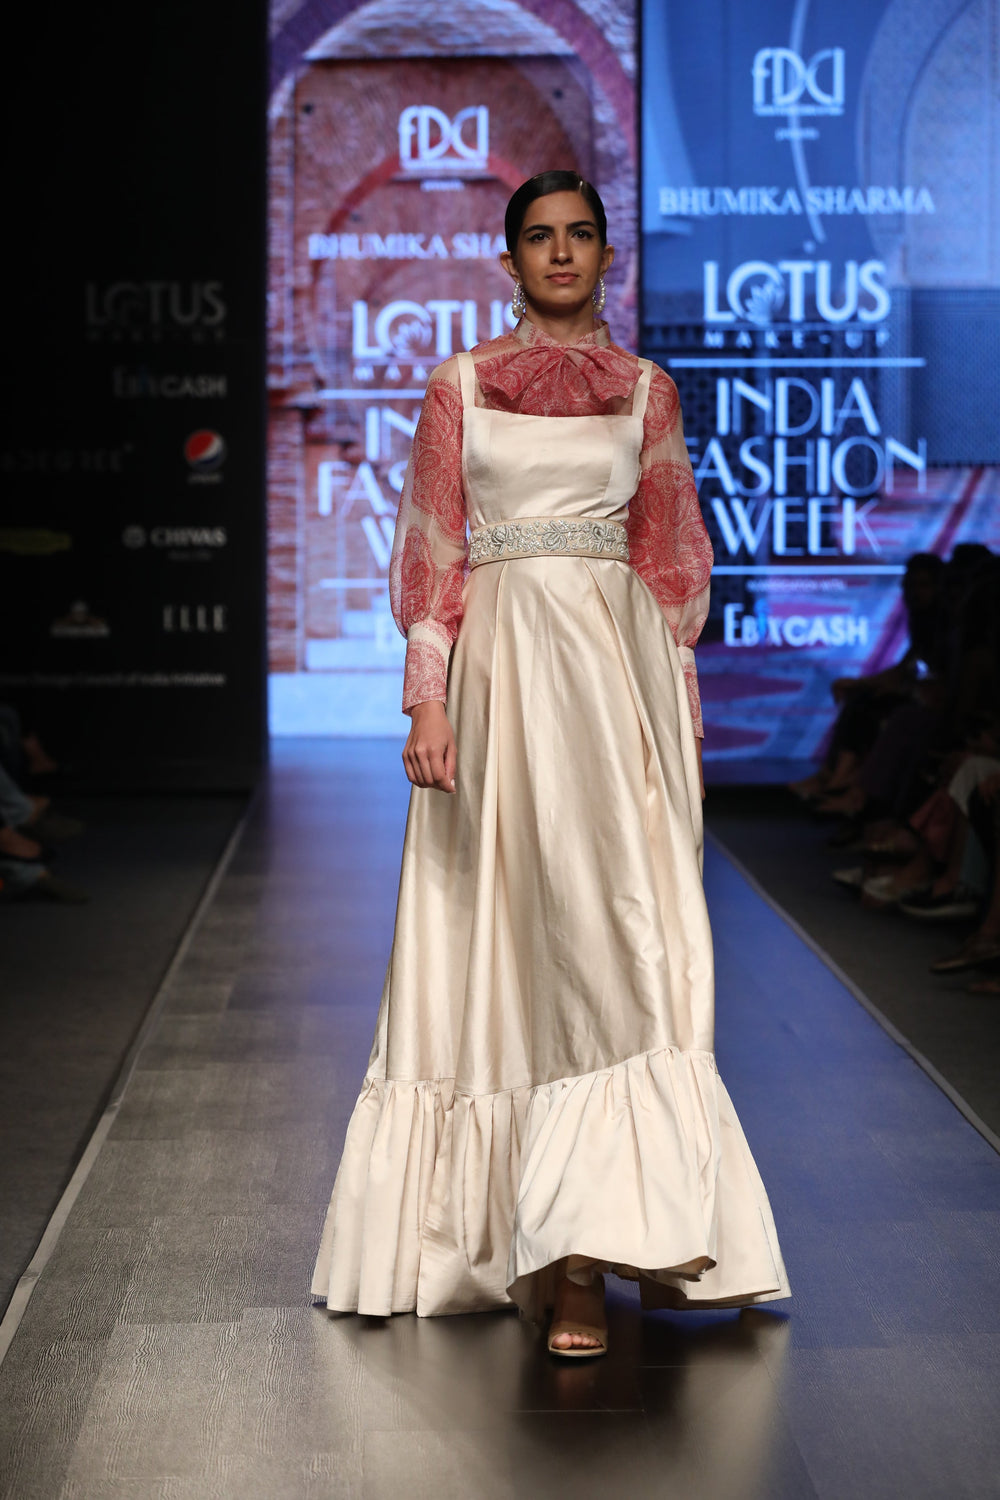 An Ivory Long Dress With A Printed Front Bow Sheer Blouse & Embellished Leather Belt - BHUMIKA SHARMA